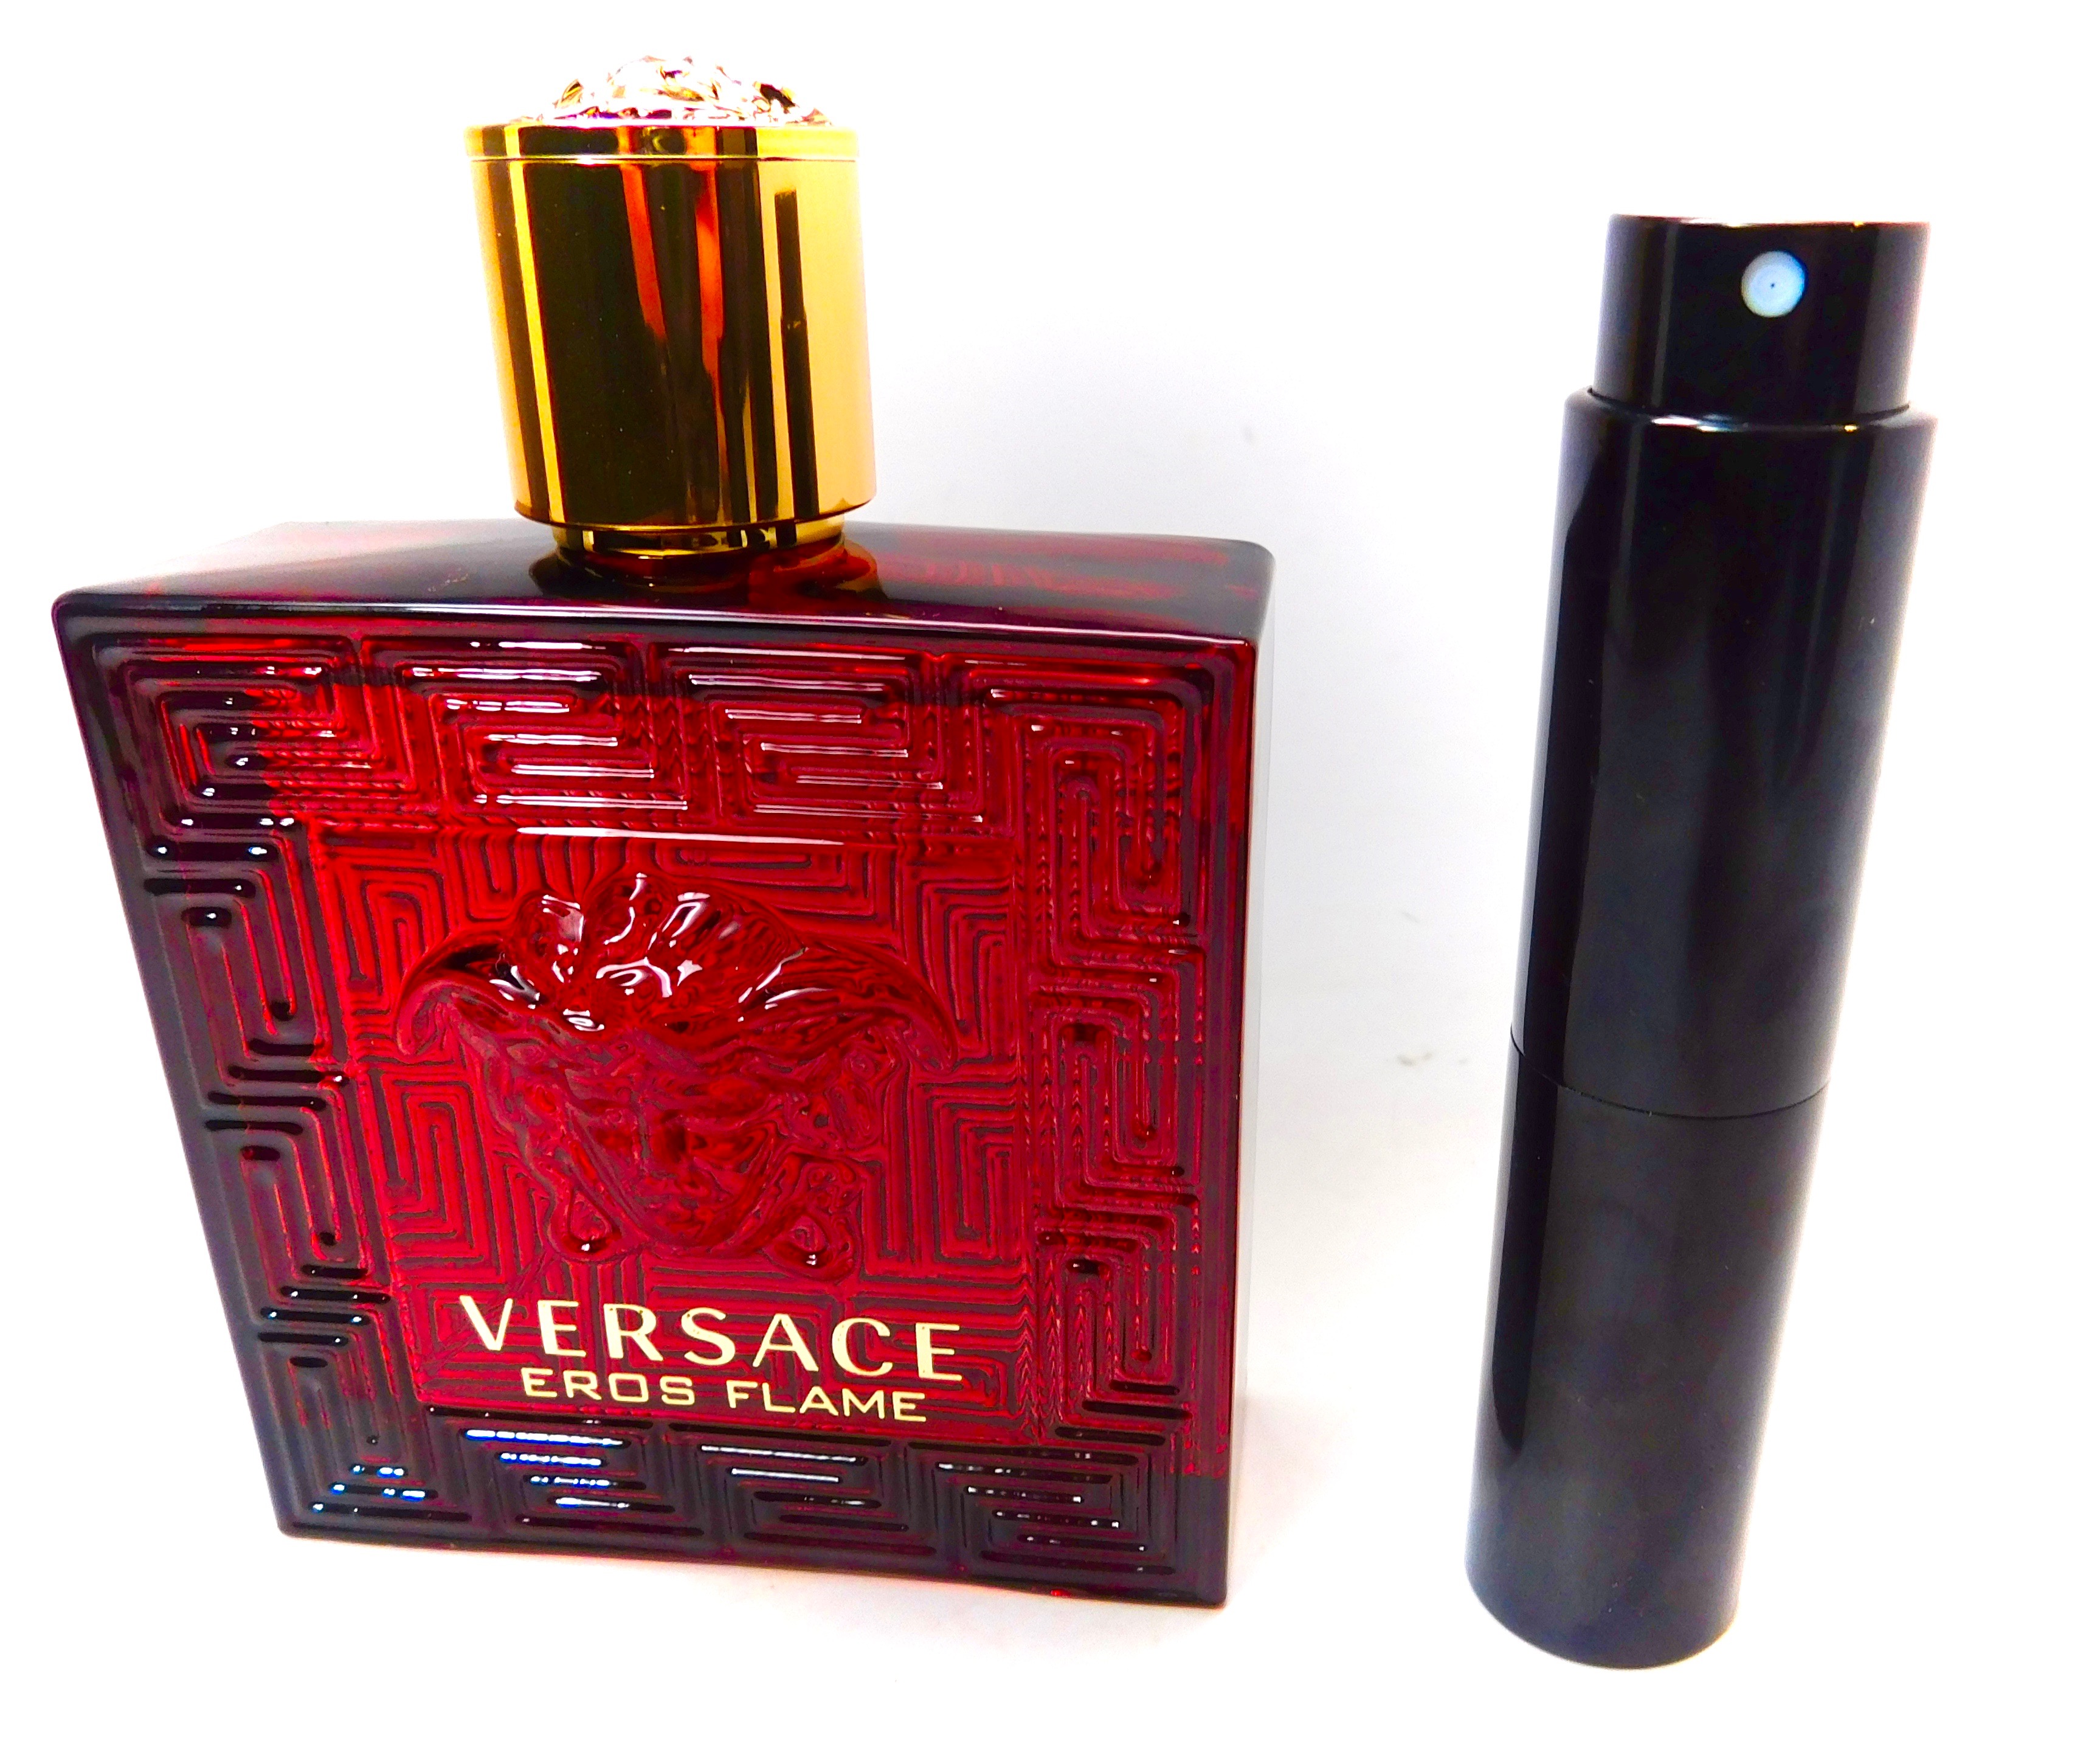 versace cologne flame